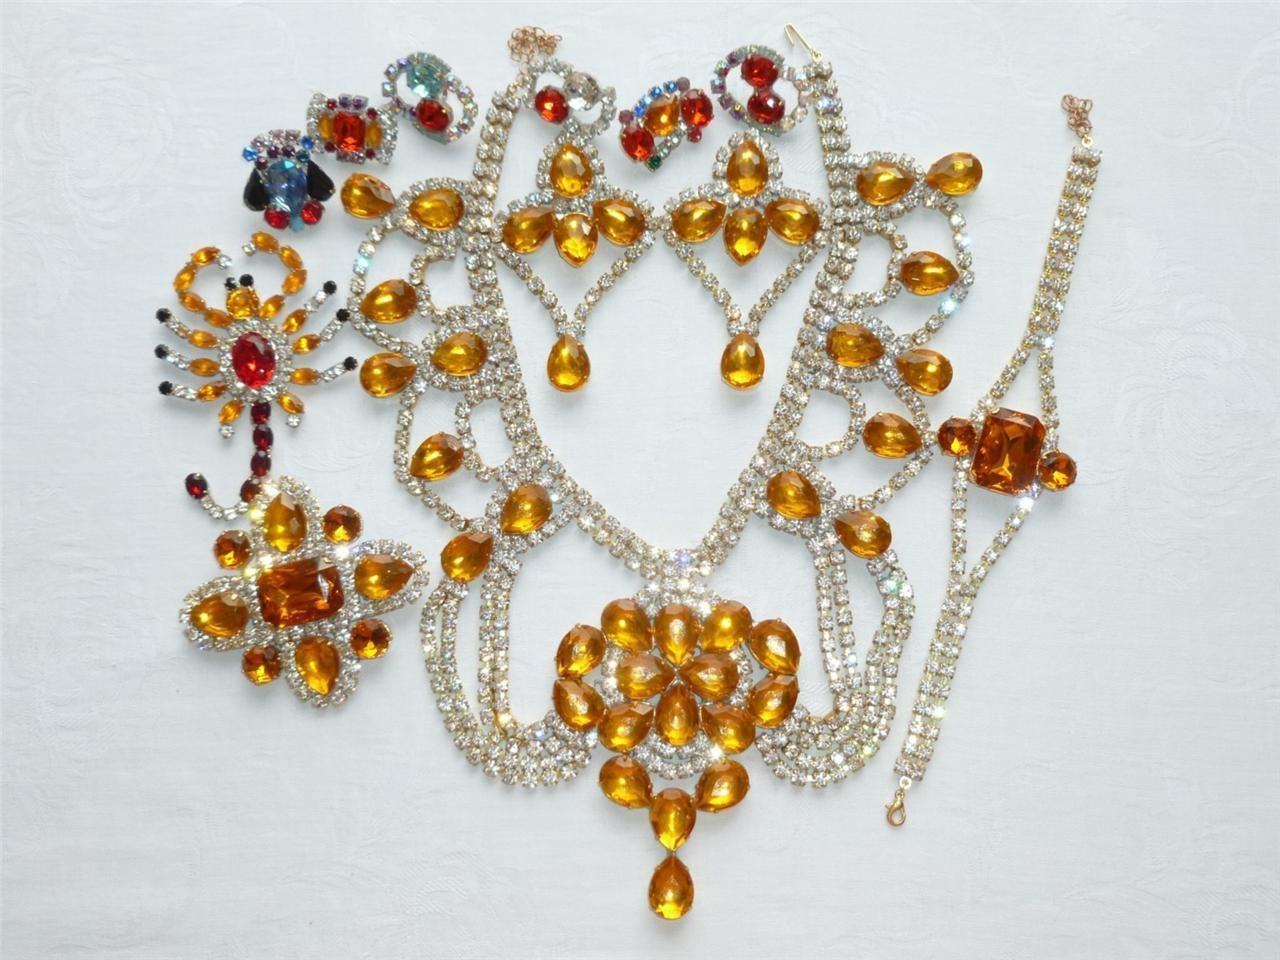 AMBER AMBIANCE is AMAZING.  This necklace set is gorgeous. Just in time for Valentine's Day! - GoldenCollectibles